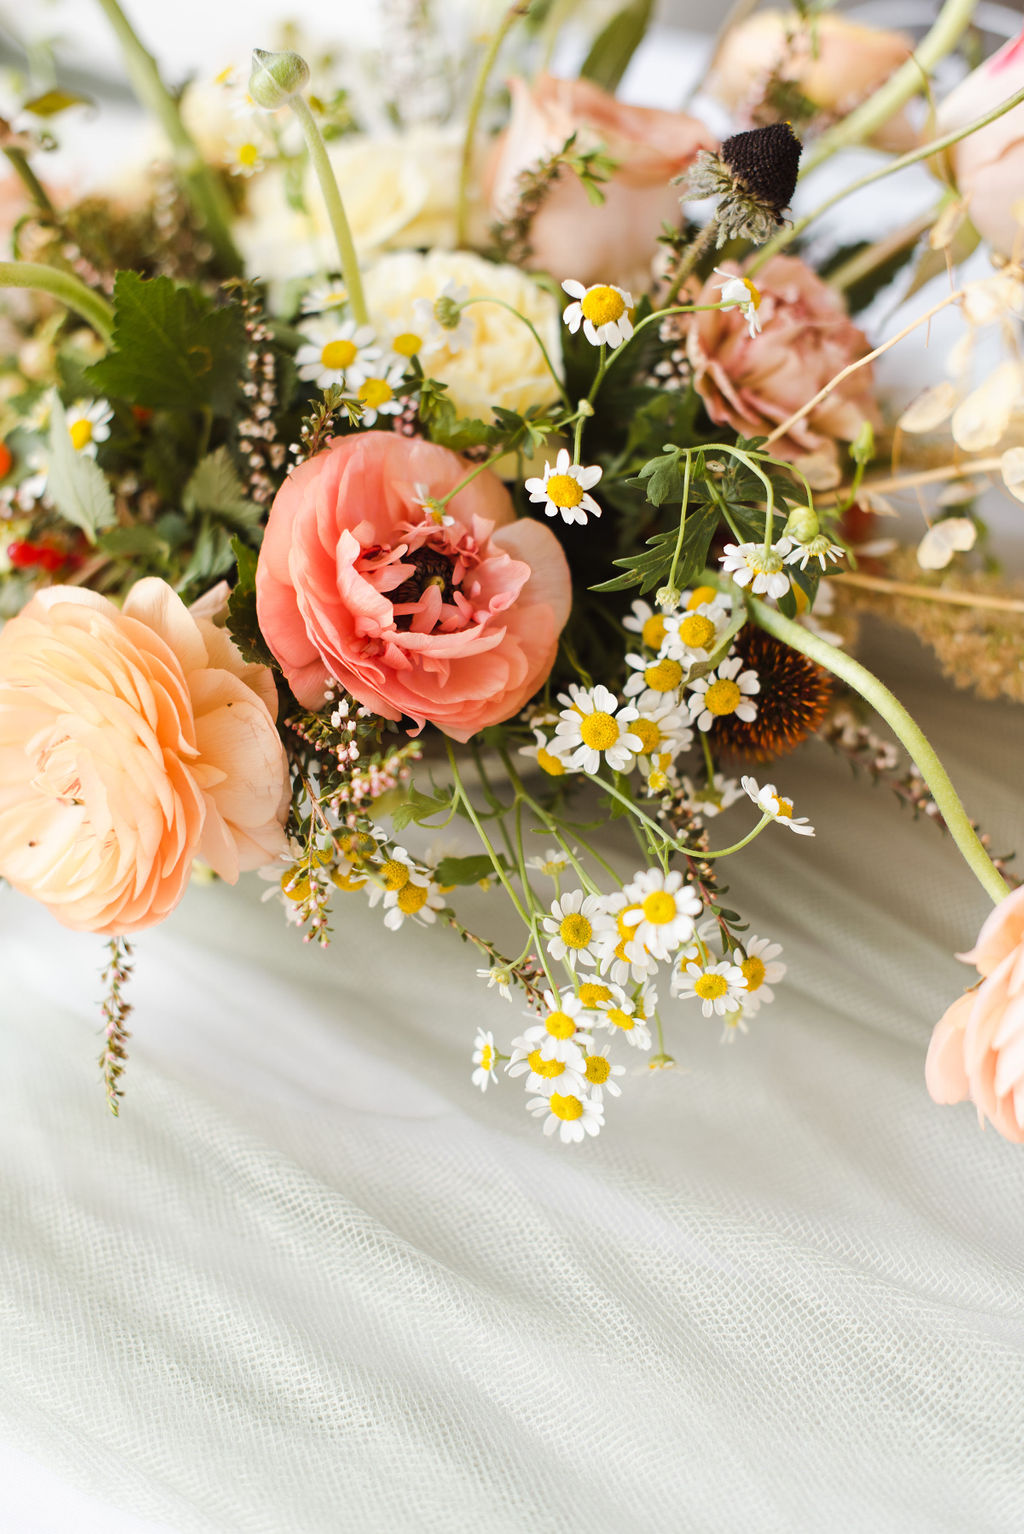 Whimsical wedding flowers of blush tones styled by Faint Floral